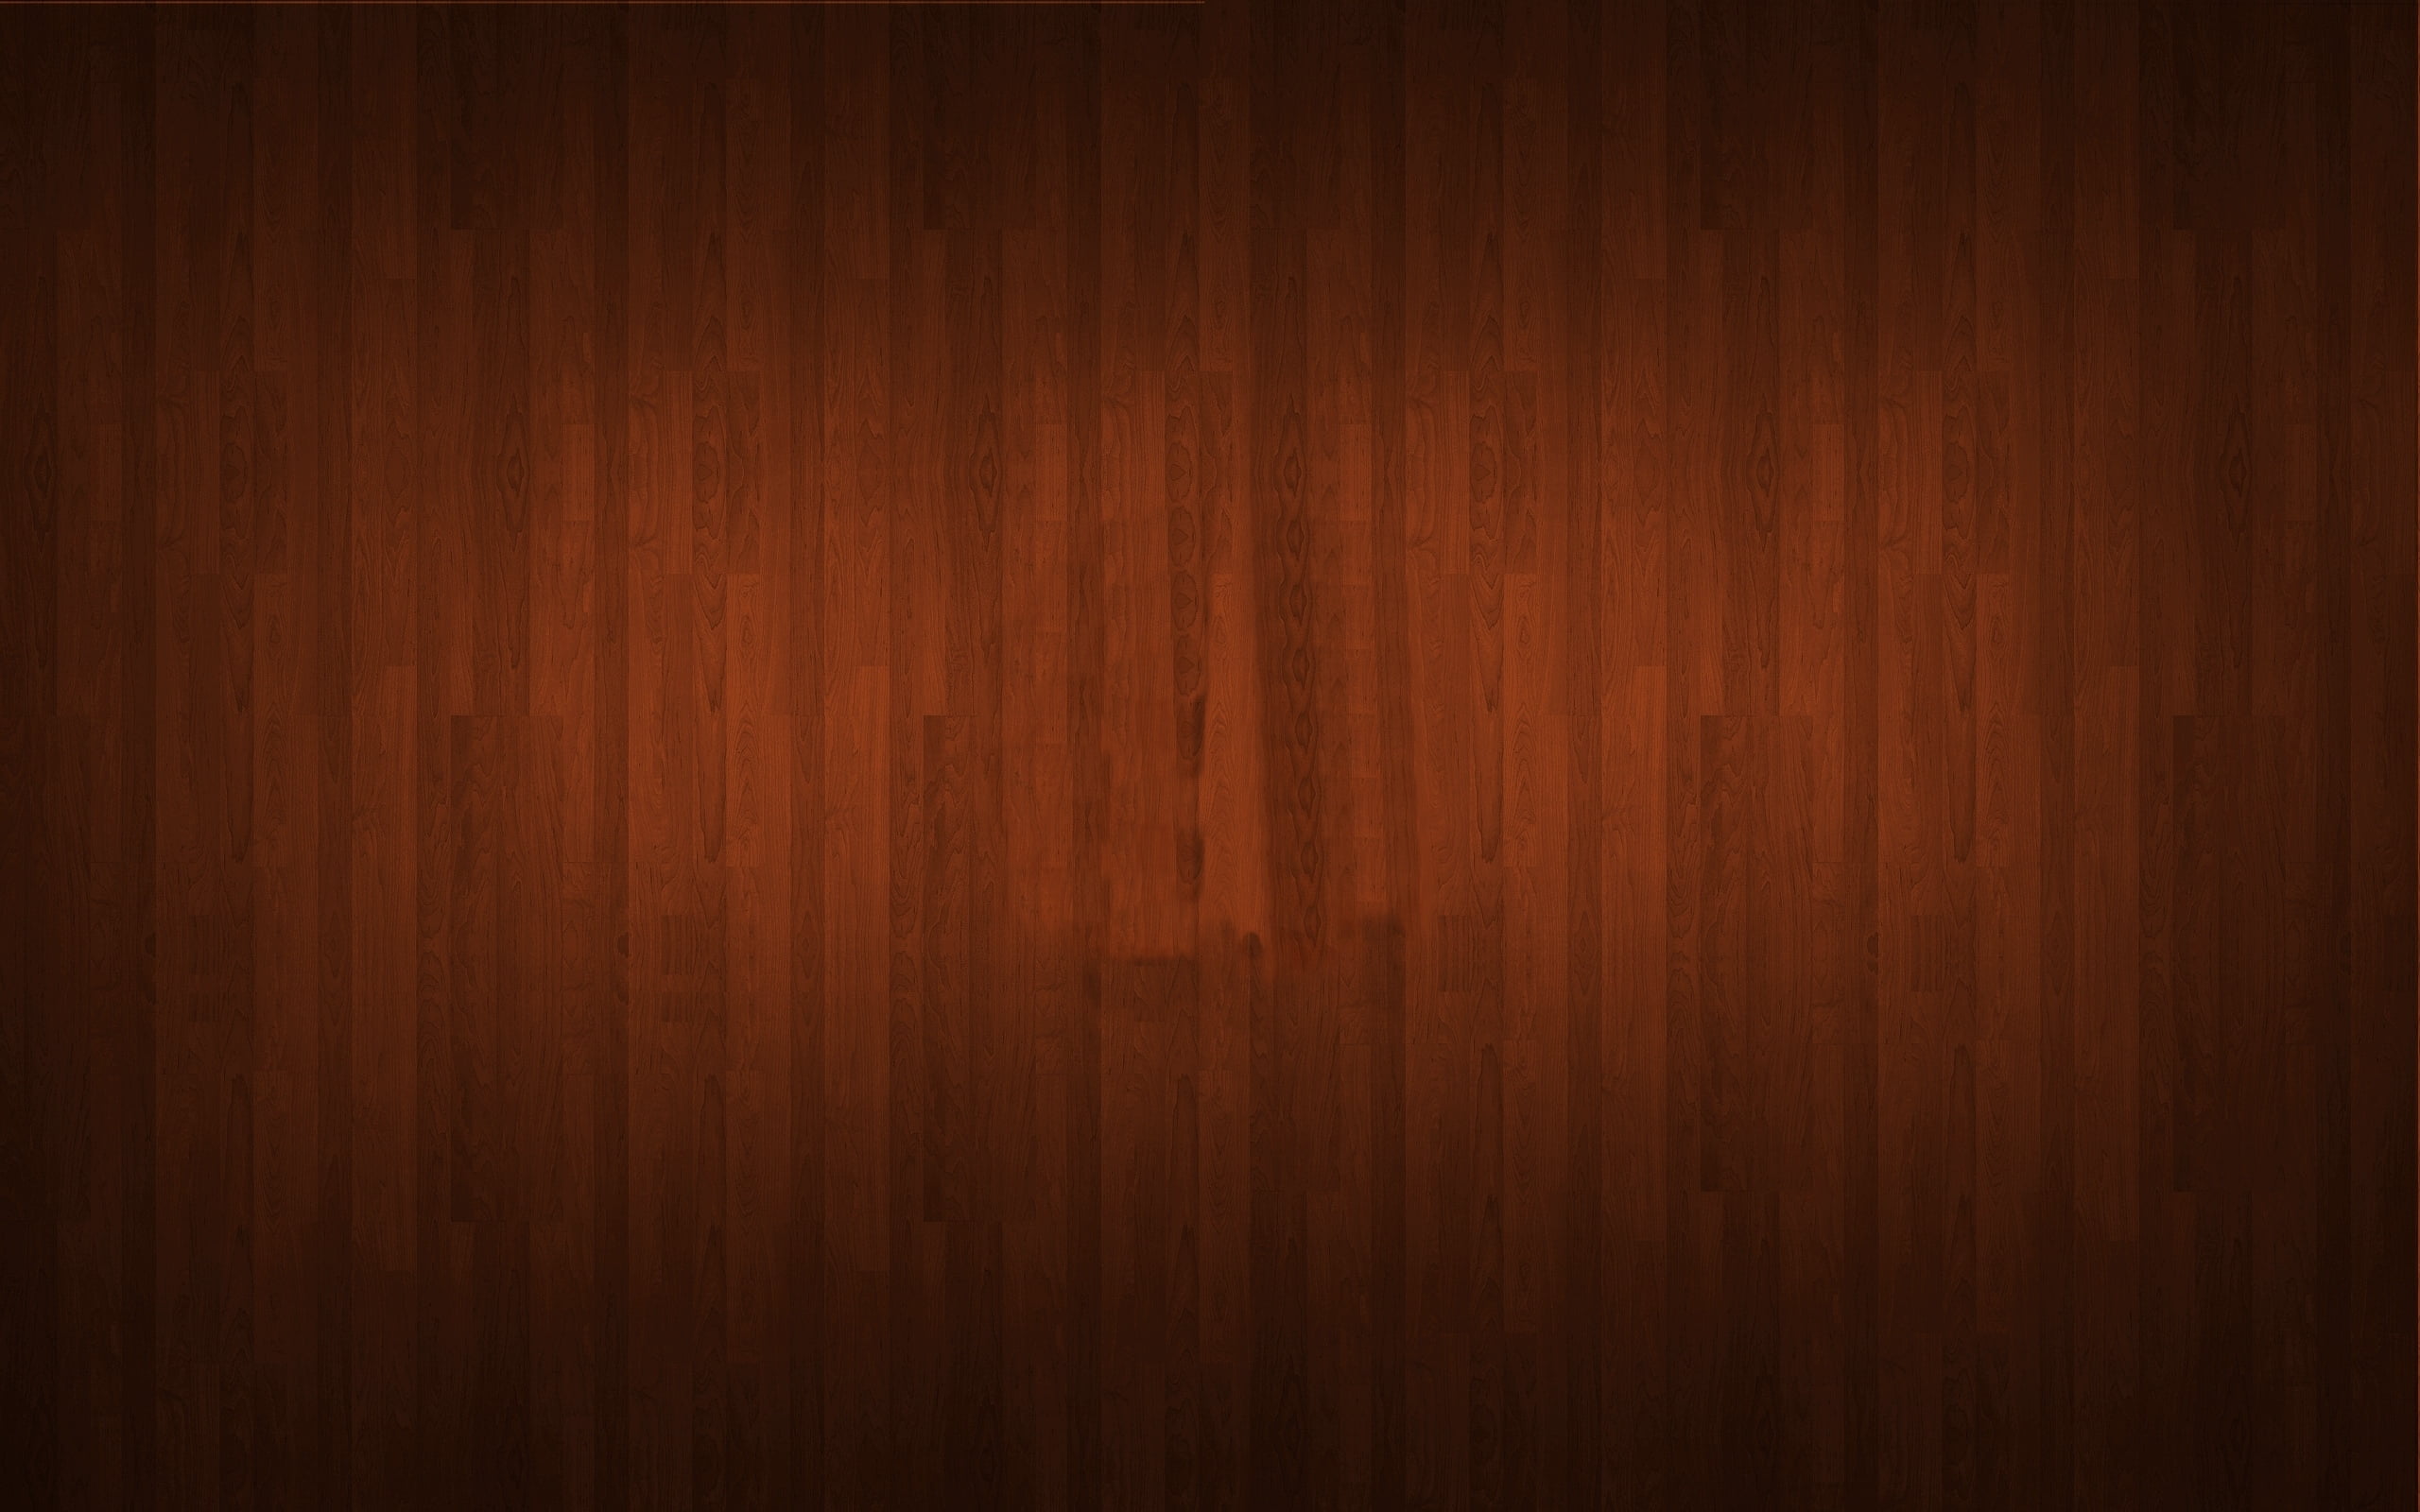 wooden, solid, dark, brown, backgrounds, wood - Material, plank